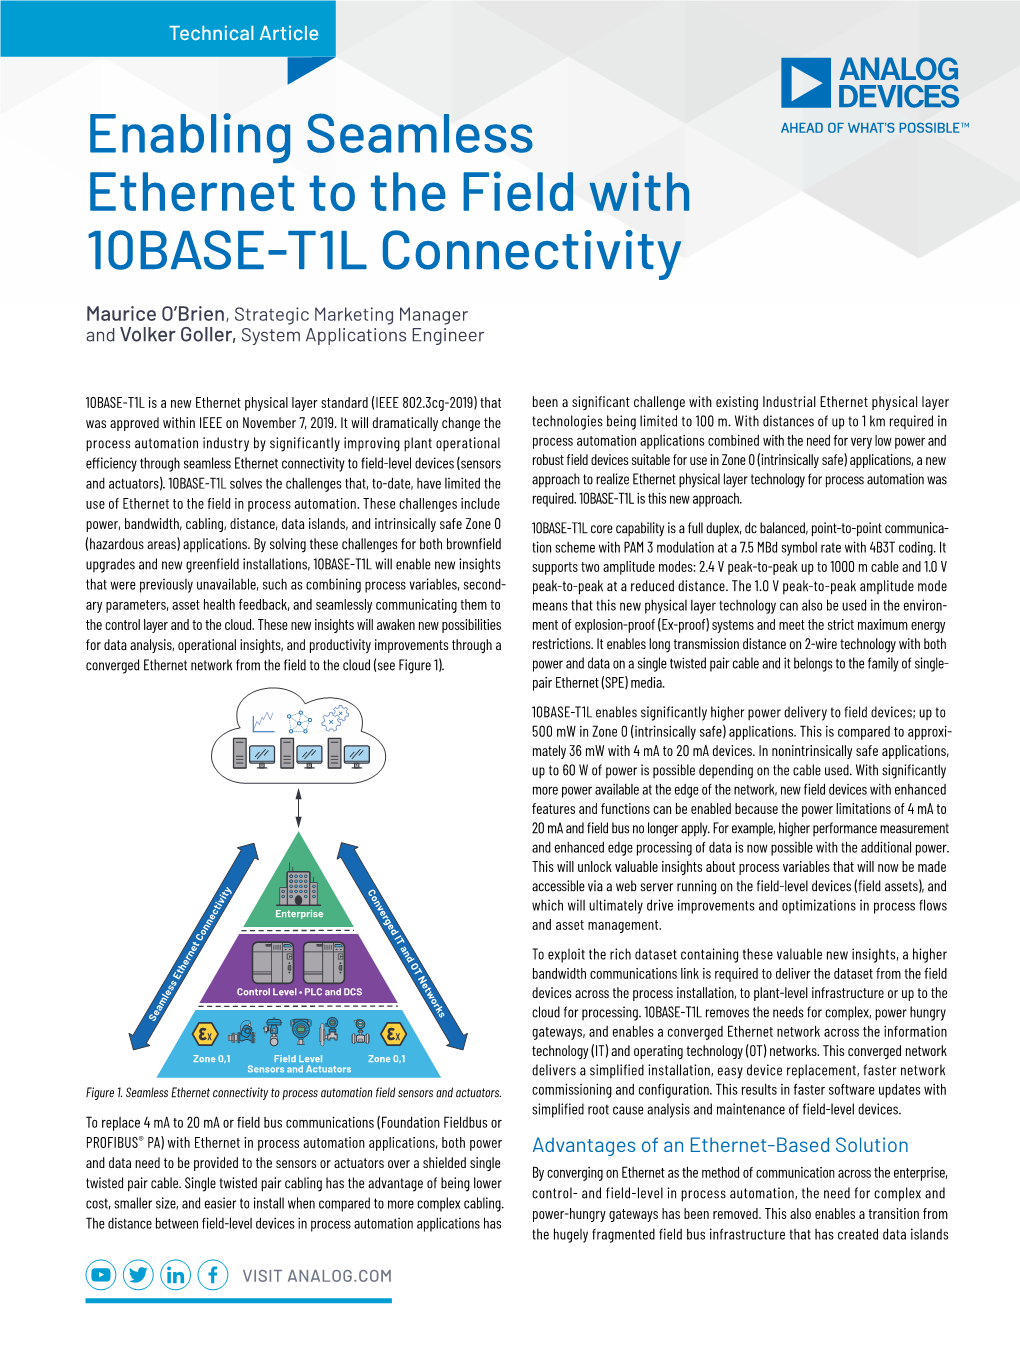 Enabling Seamless Ethernet to the Field with 10BASE-T1L Connectivity